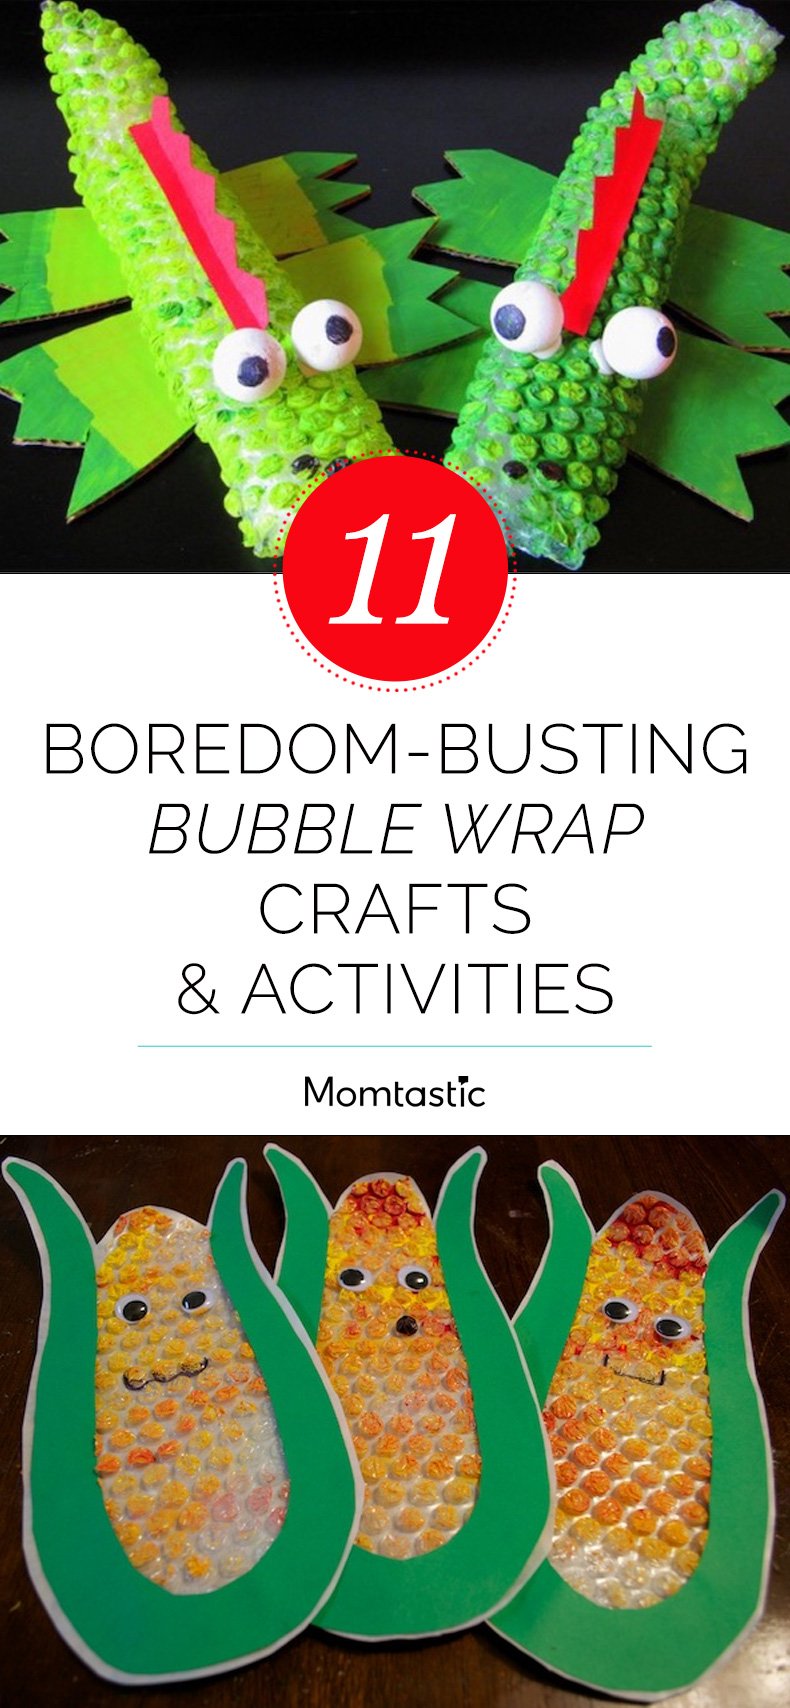 11 Boredom-Busting Bubble Wrap Crafts & Activities